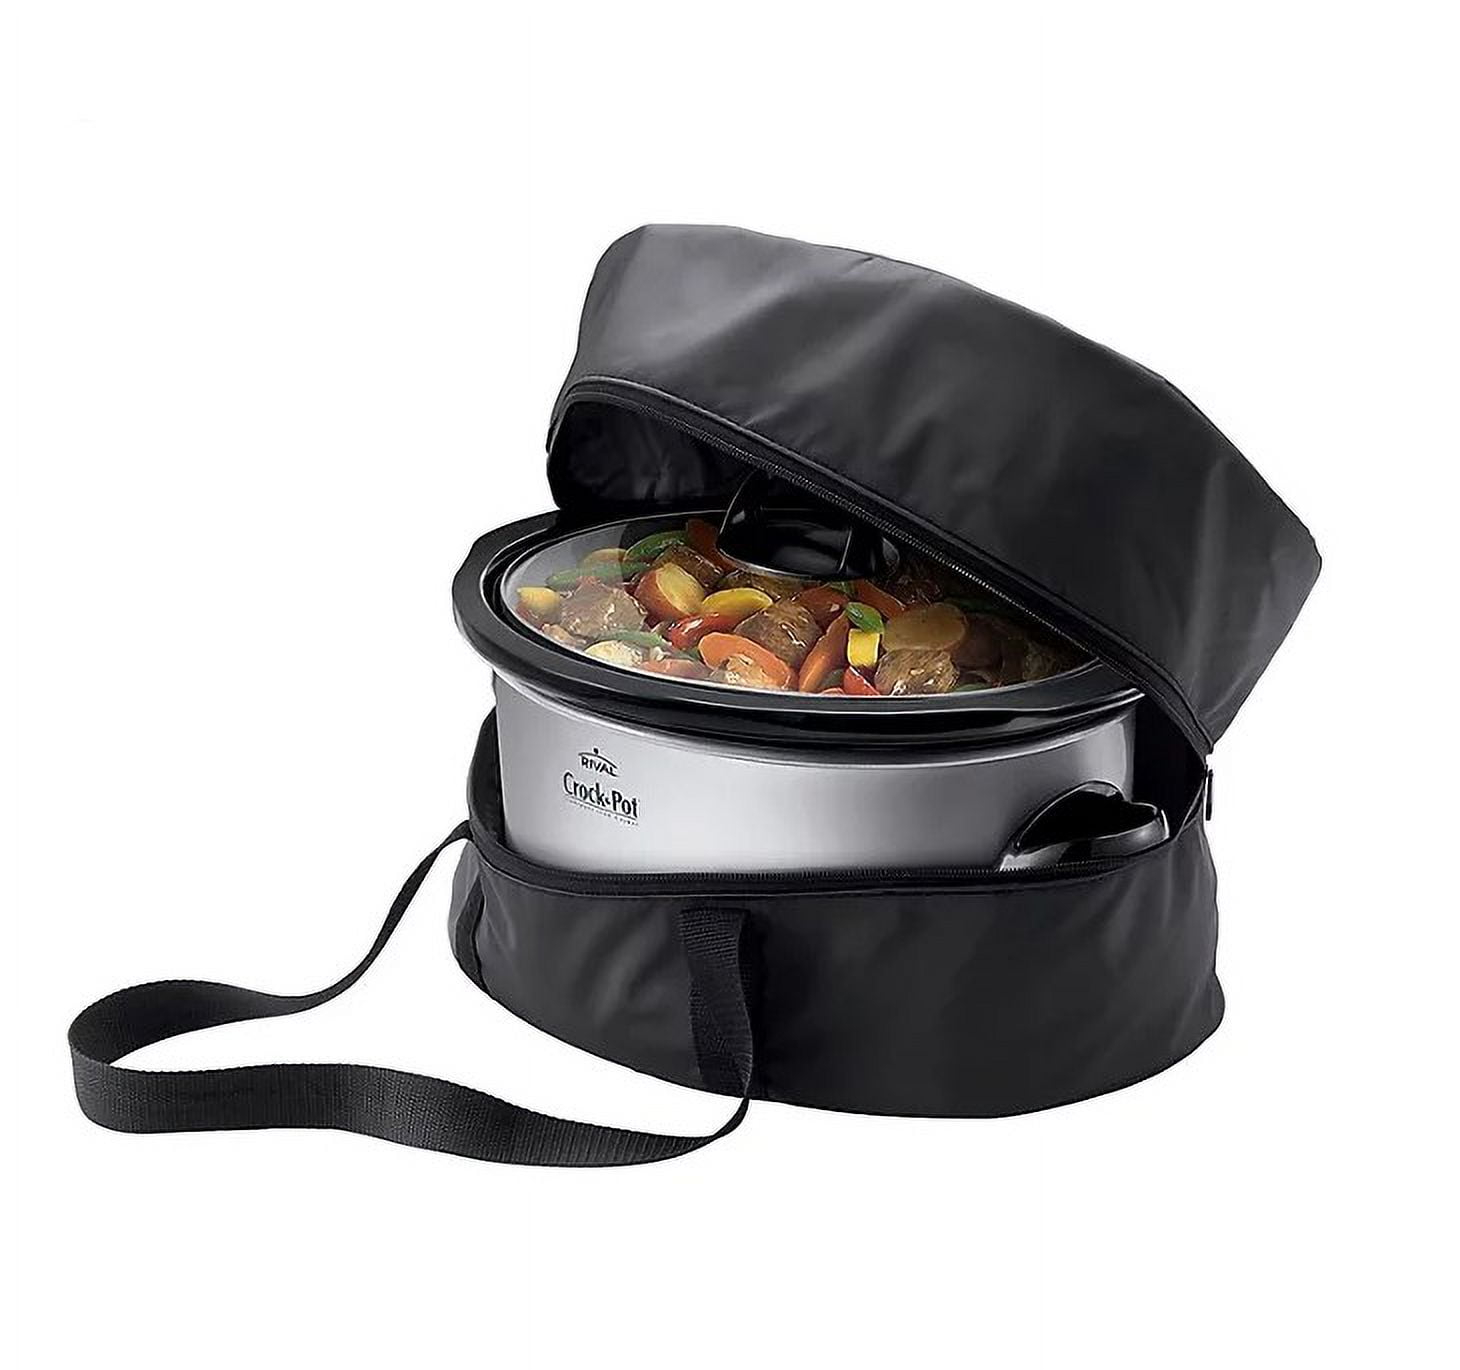 Crock-Pot Programmable Cook & Carry 7 Quart Slow Cooker - NEW IN DAMAGED  BOX 53891128773